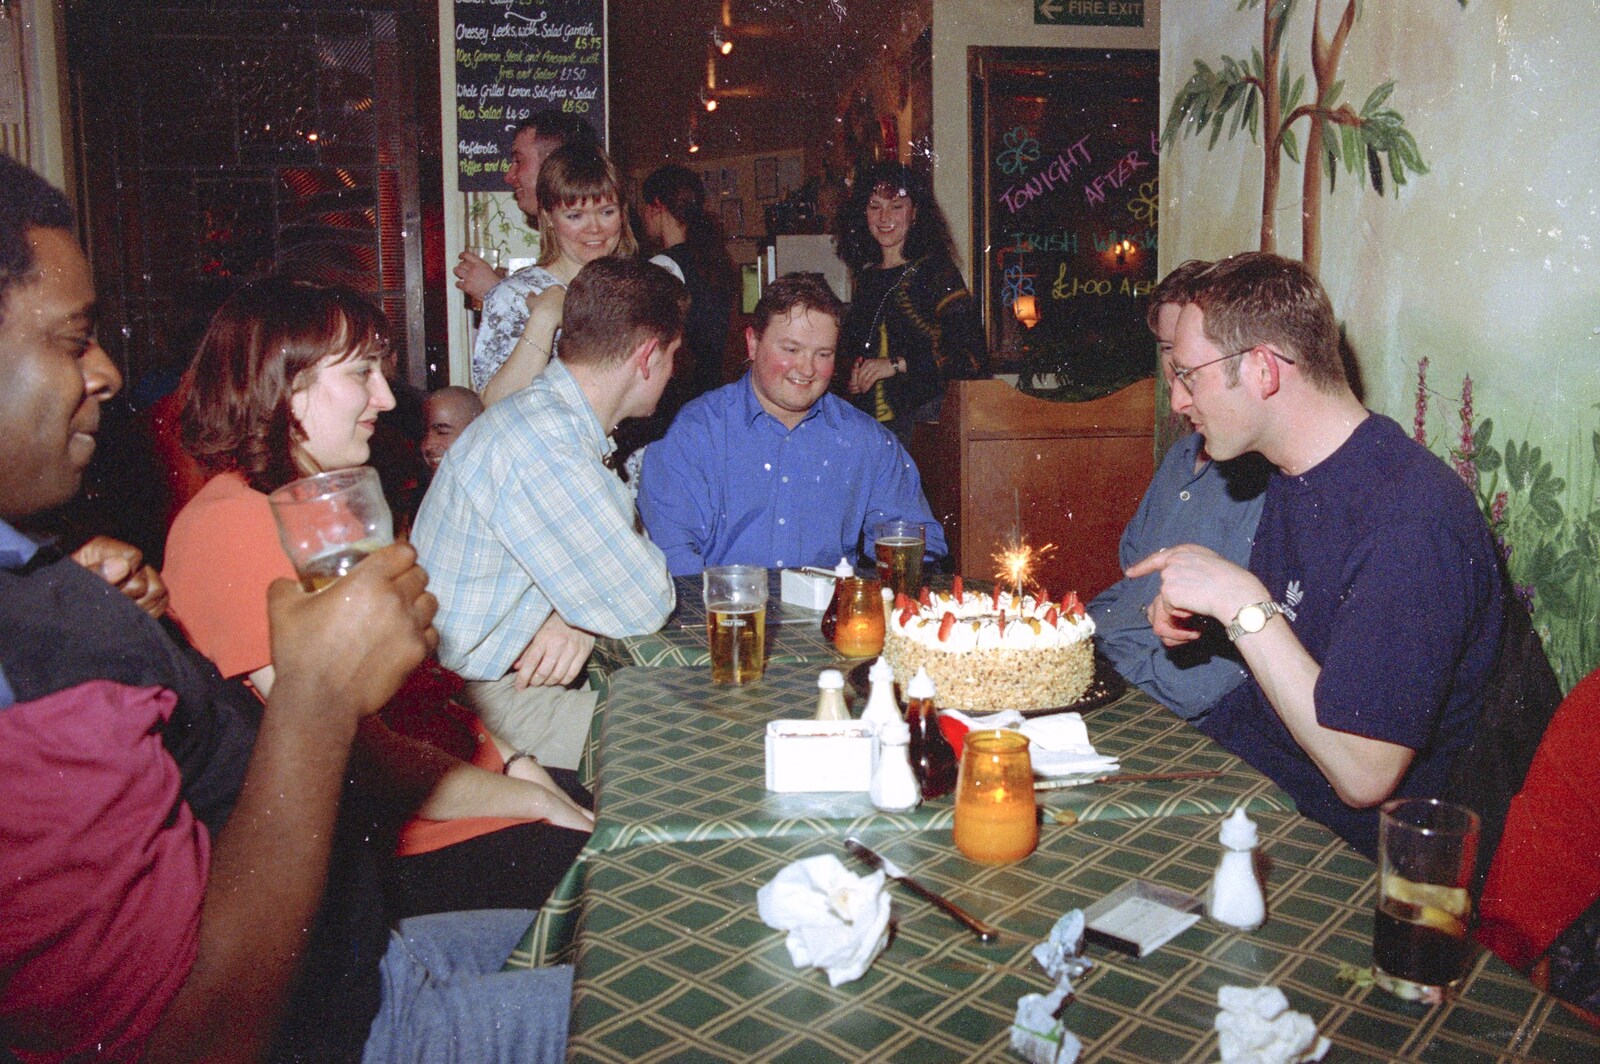 Dougie points at his cake from Dougie's Birthday and Adrian Leaves CISU, Ipswich, Suffolk - 29th June 1997